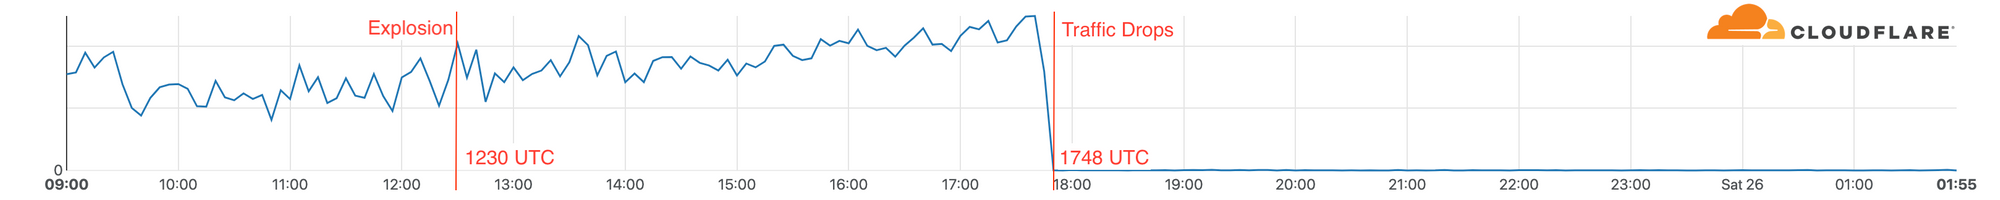 Internet traffic disruption caused by the Christmas Day bombing in Nashville